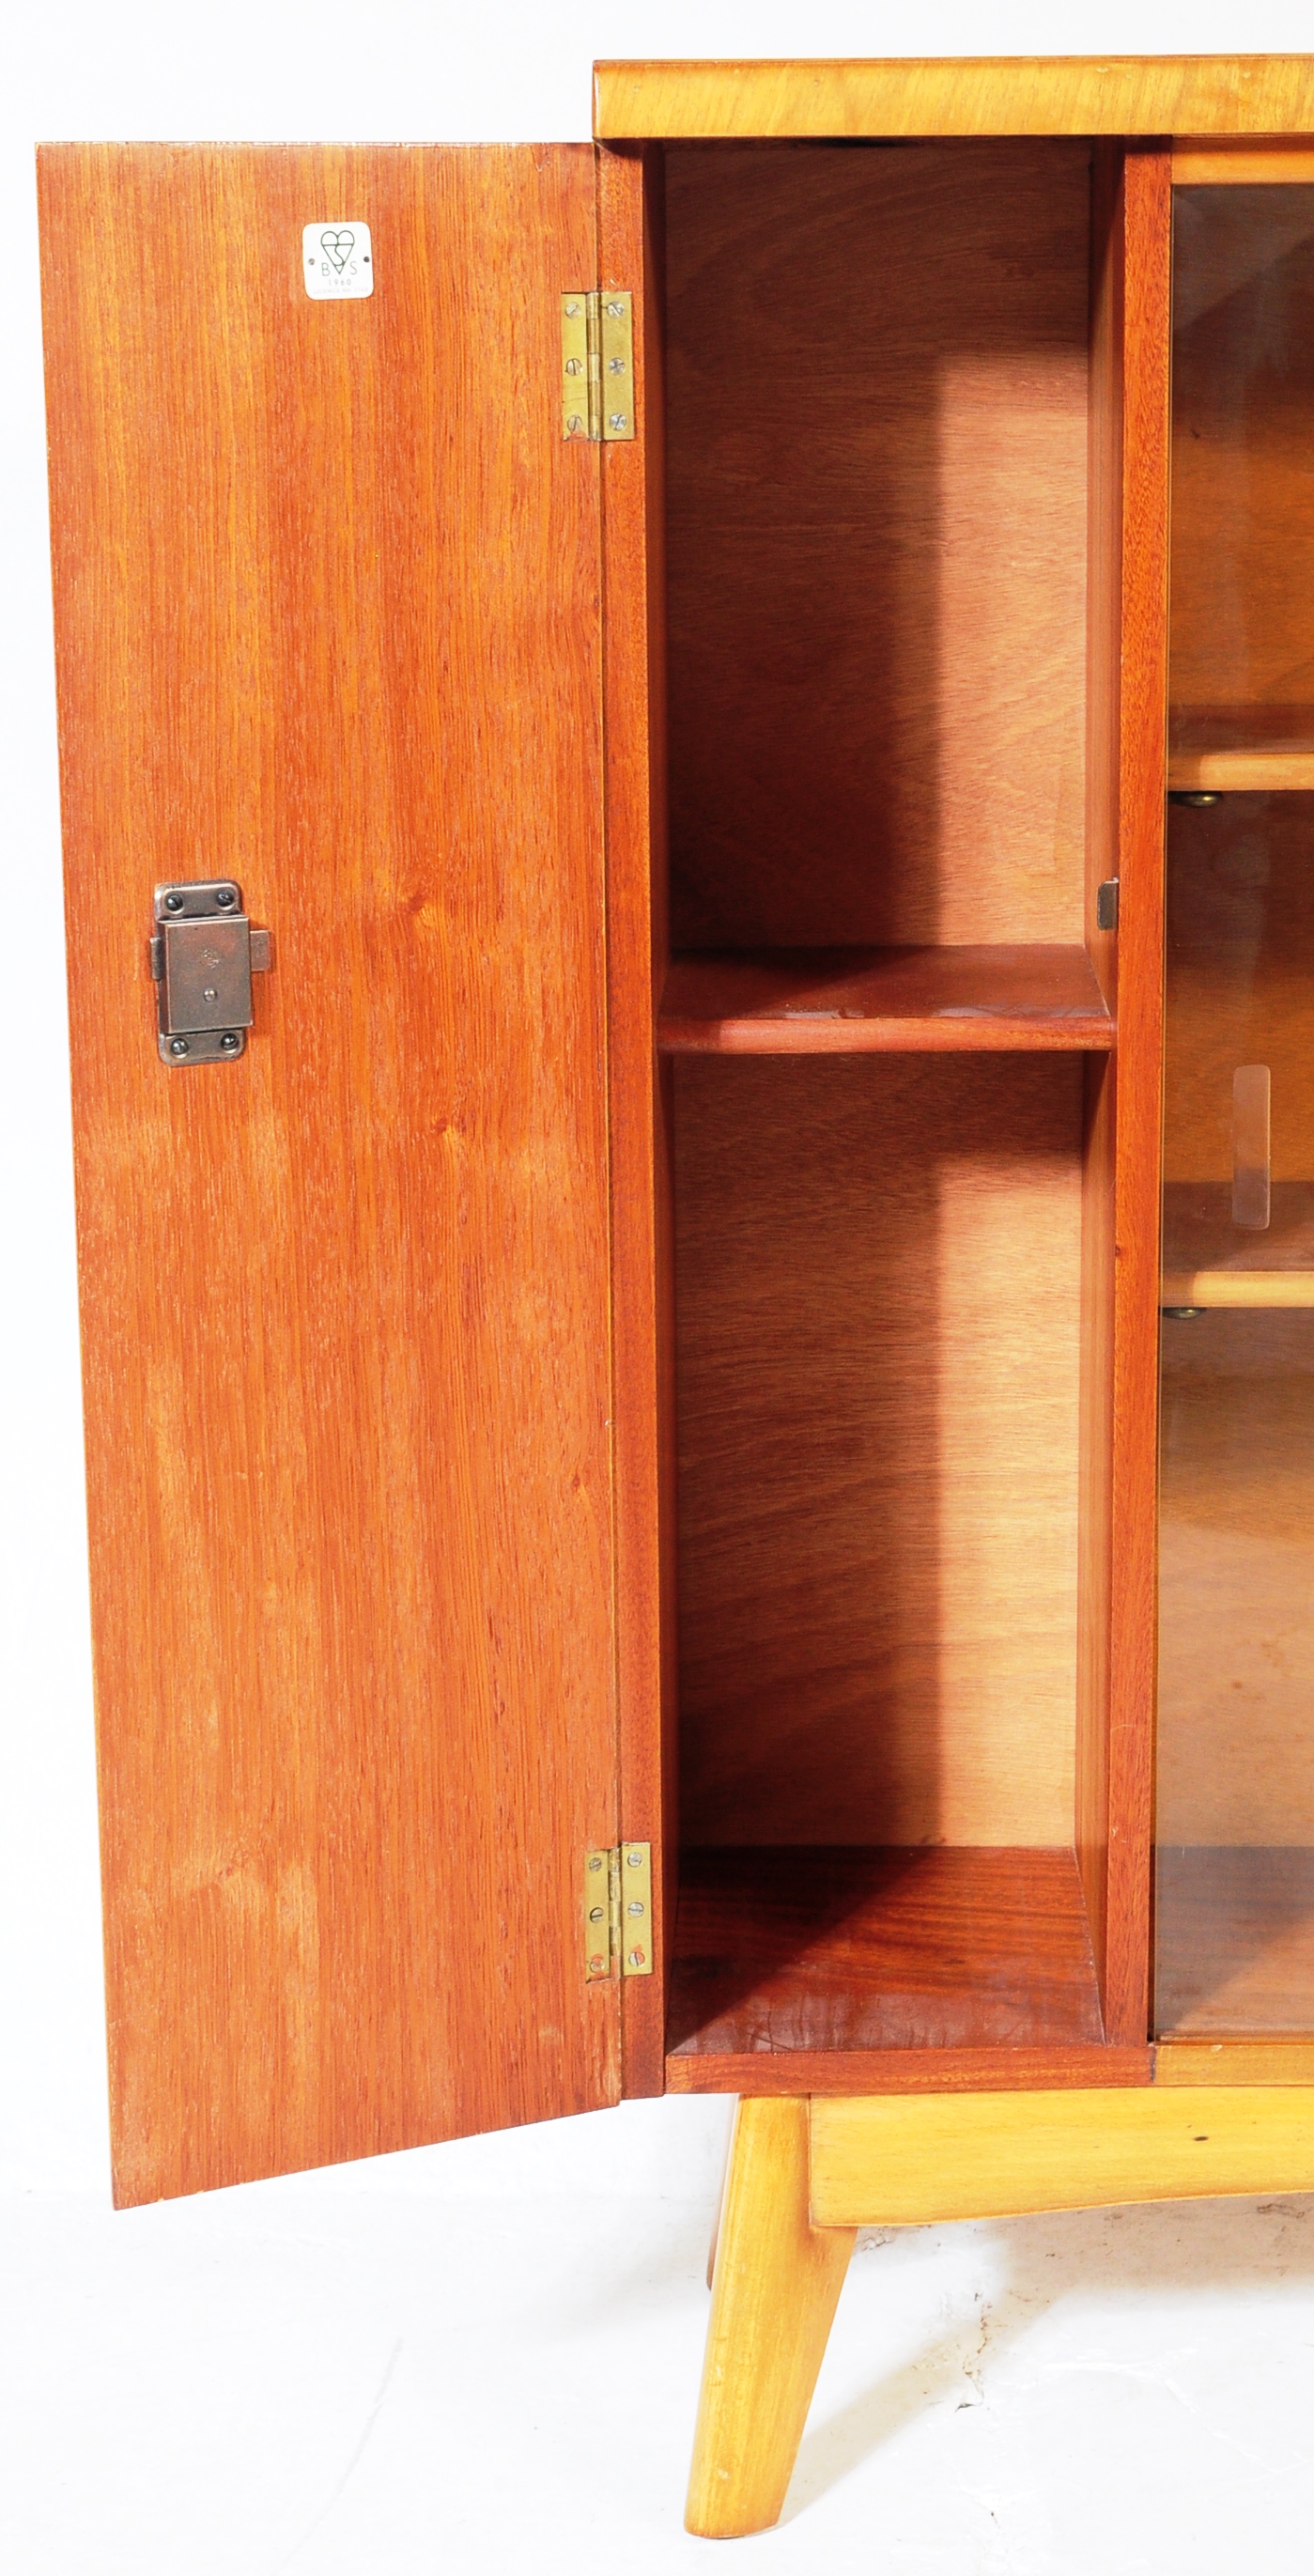 NATHAN FURNITURE - MID CENTURY TEAK WOOD LIBRARY BOOKCASE - Image 3 of 8